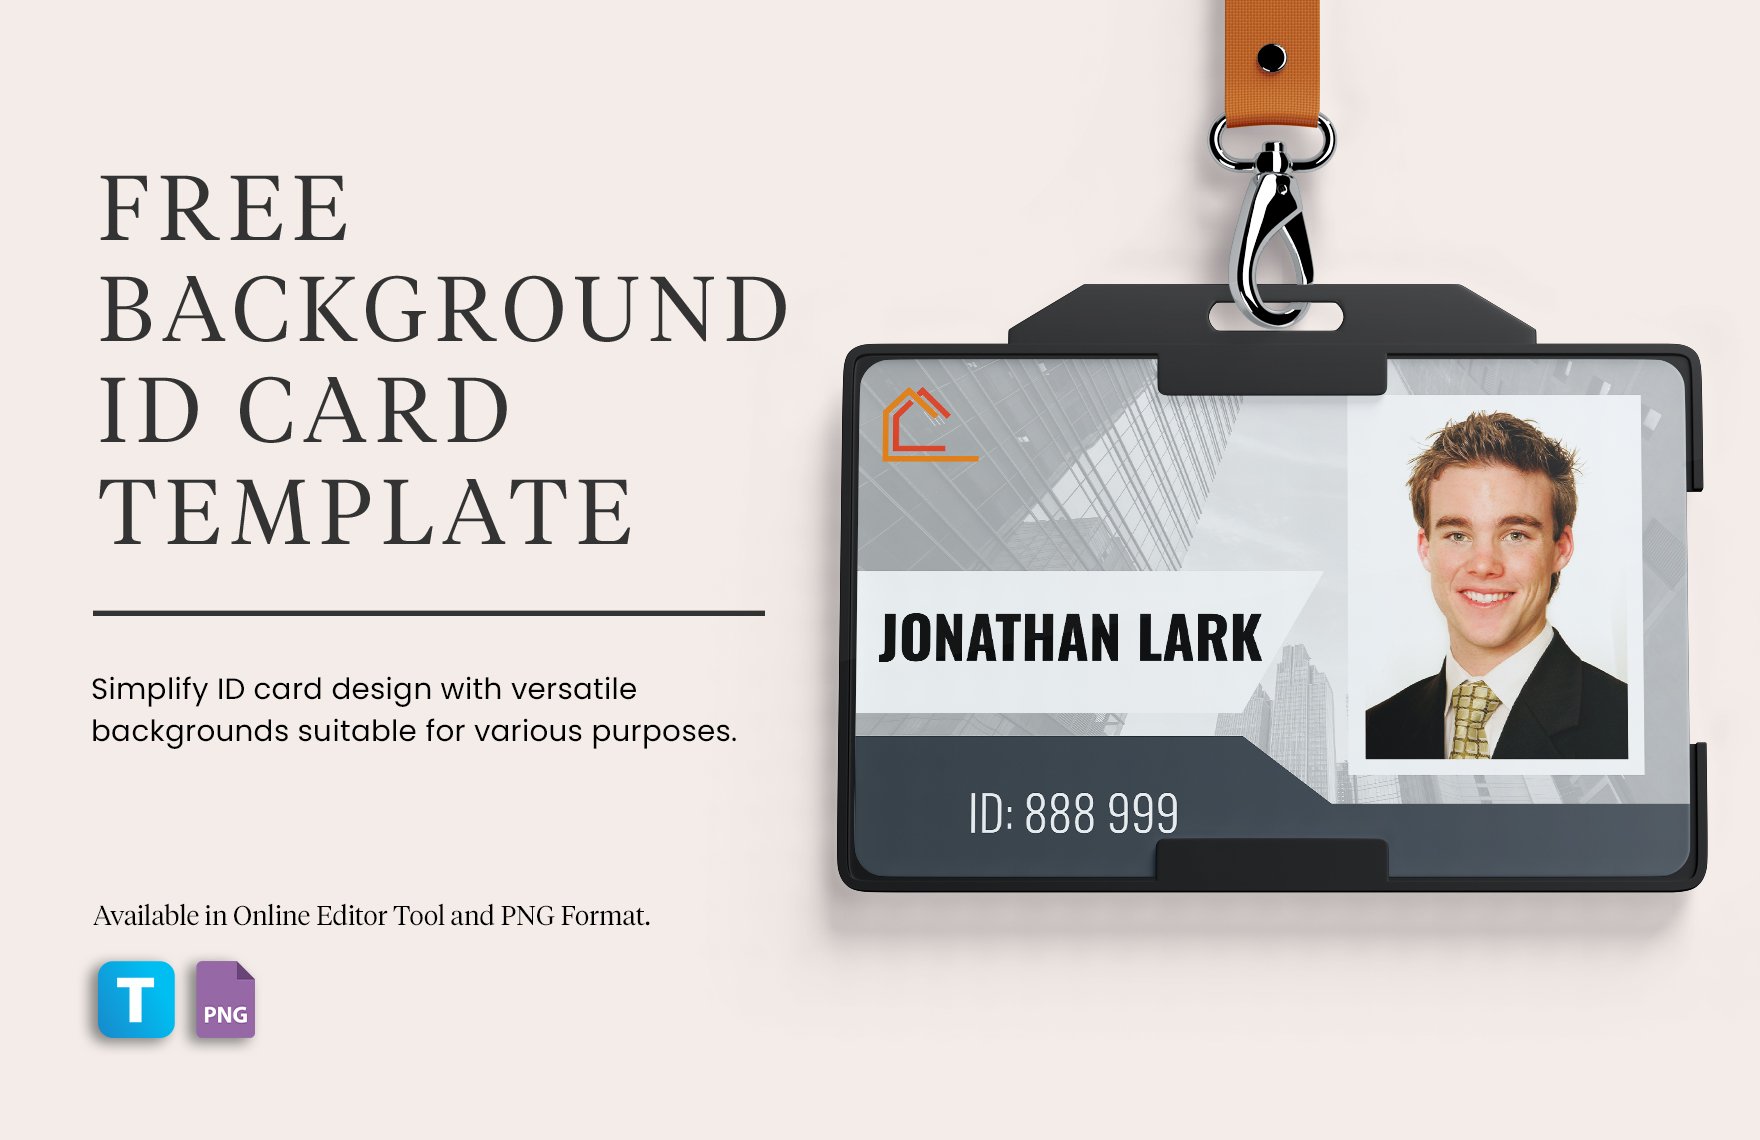 Free Background ID Card Template